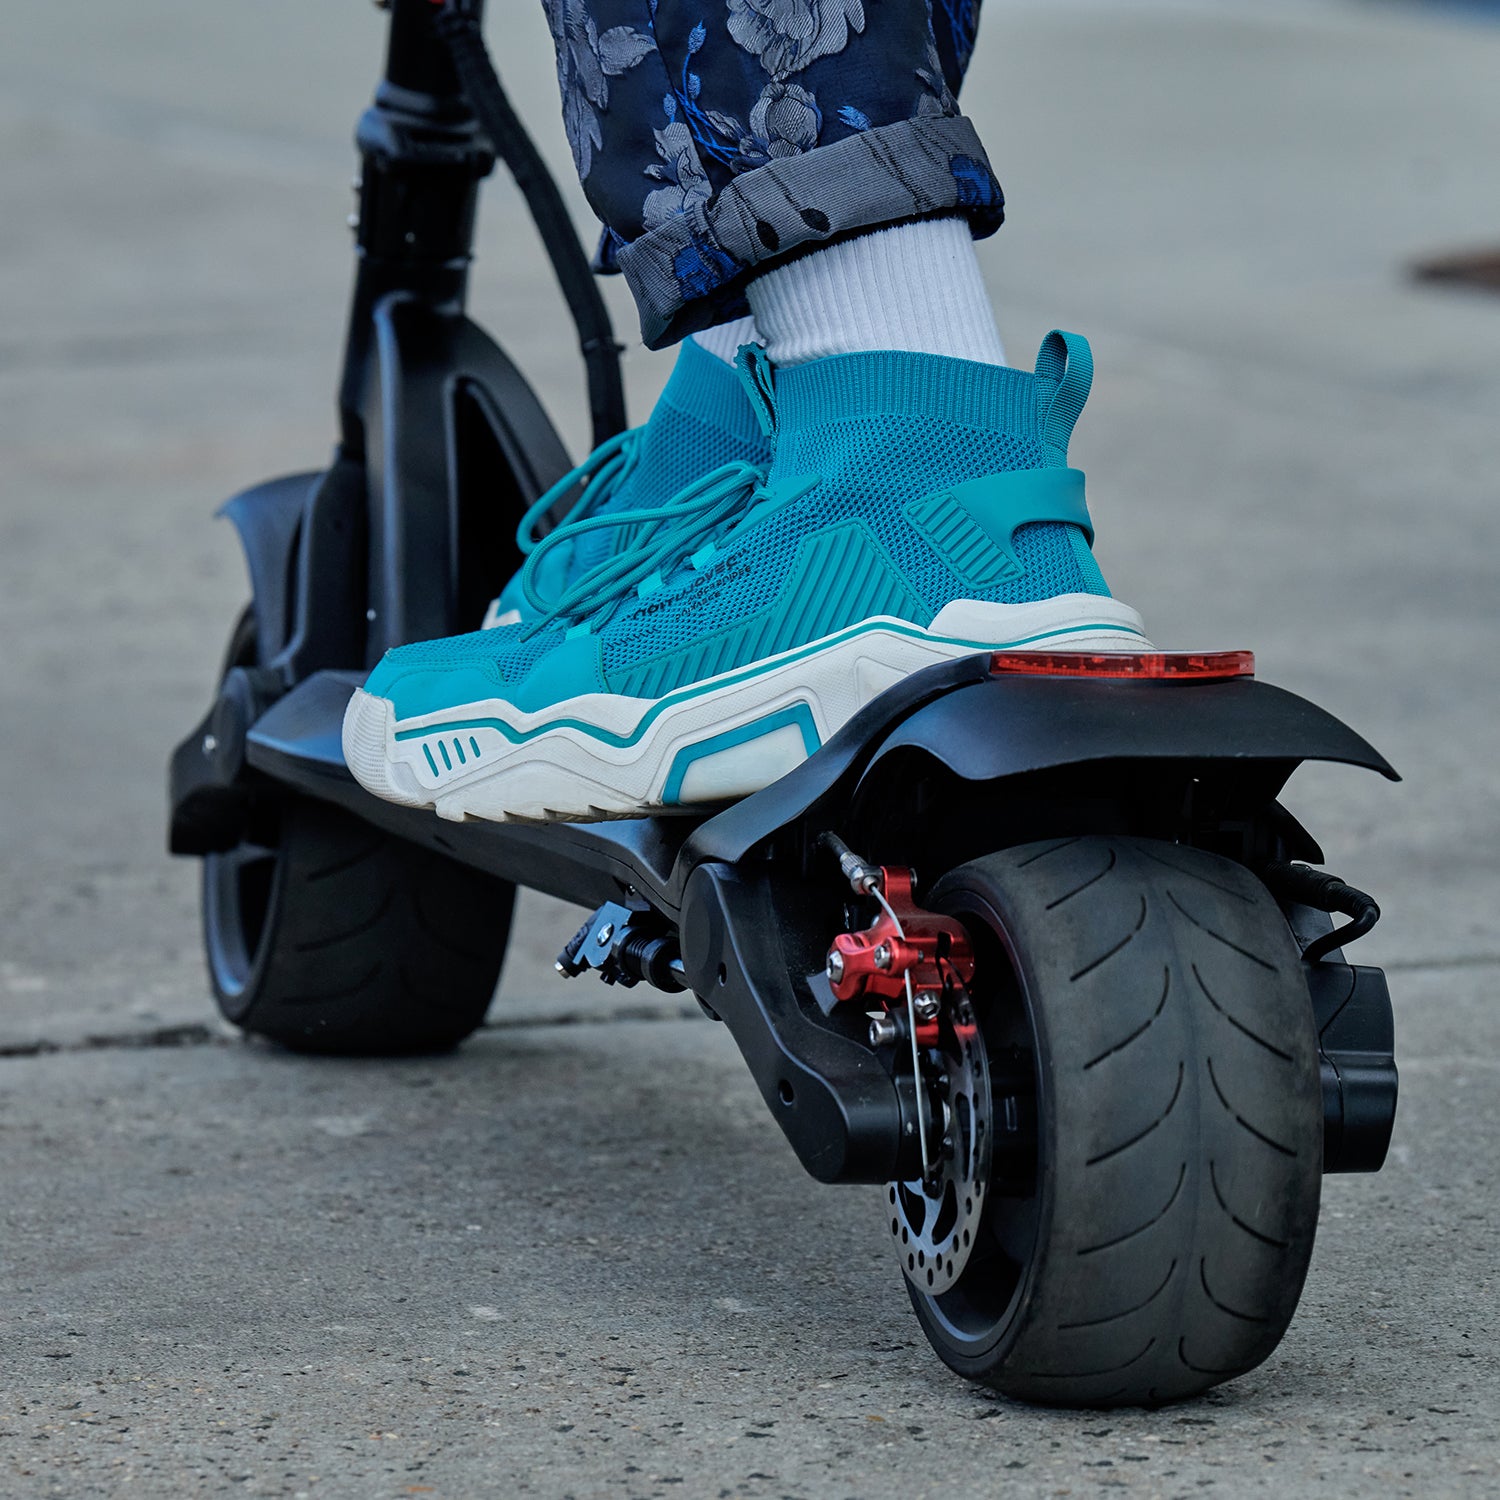 Viro Electric Scooter Not Working: Troubleshooting Tips to Get Back on the Road